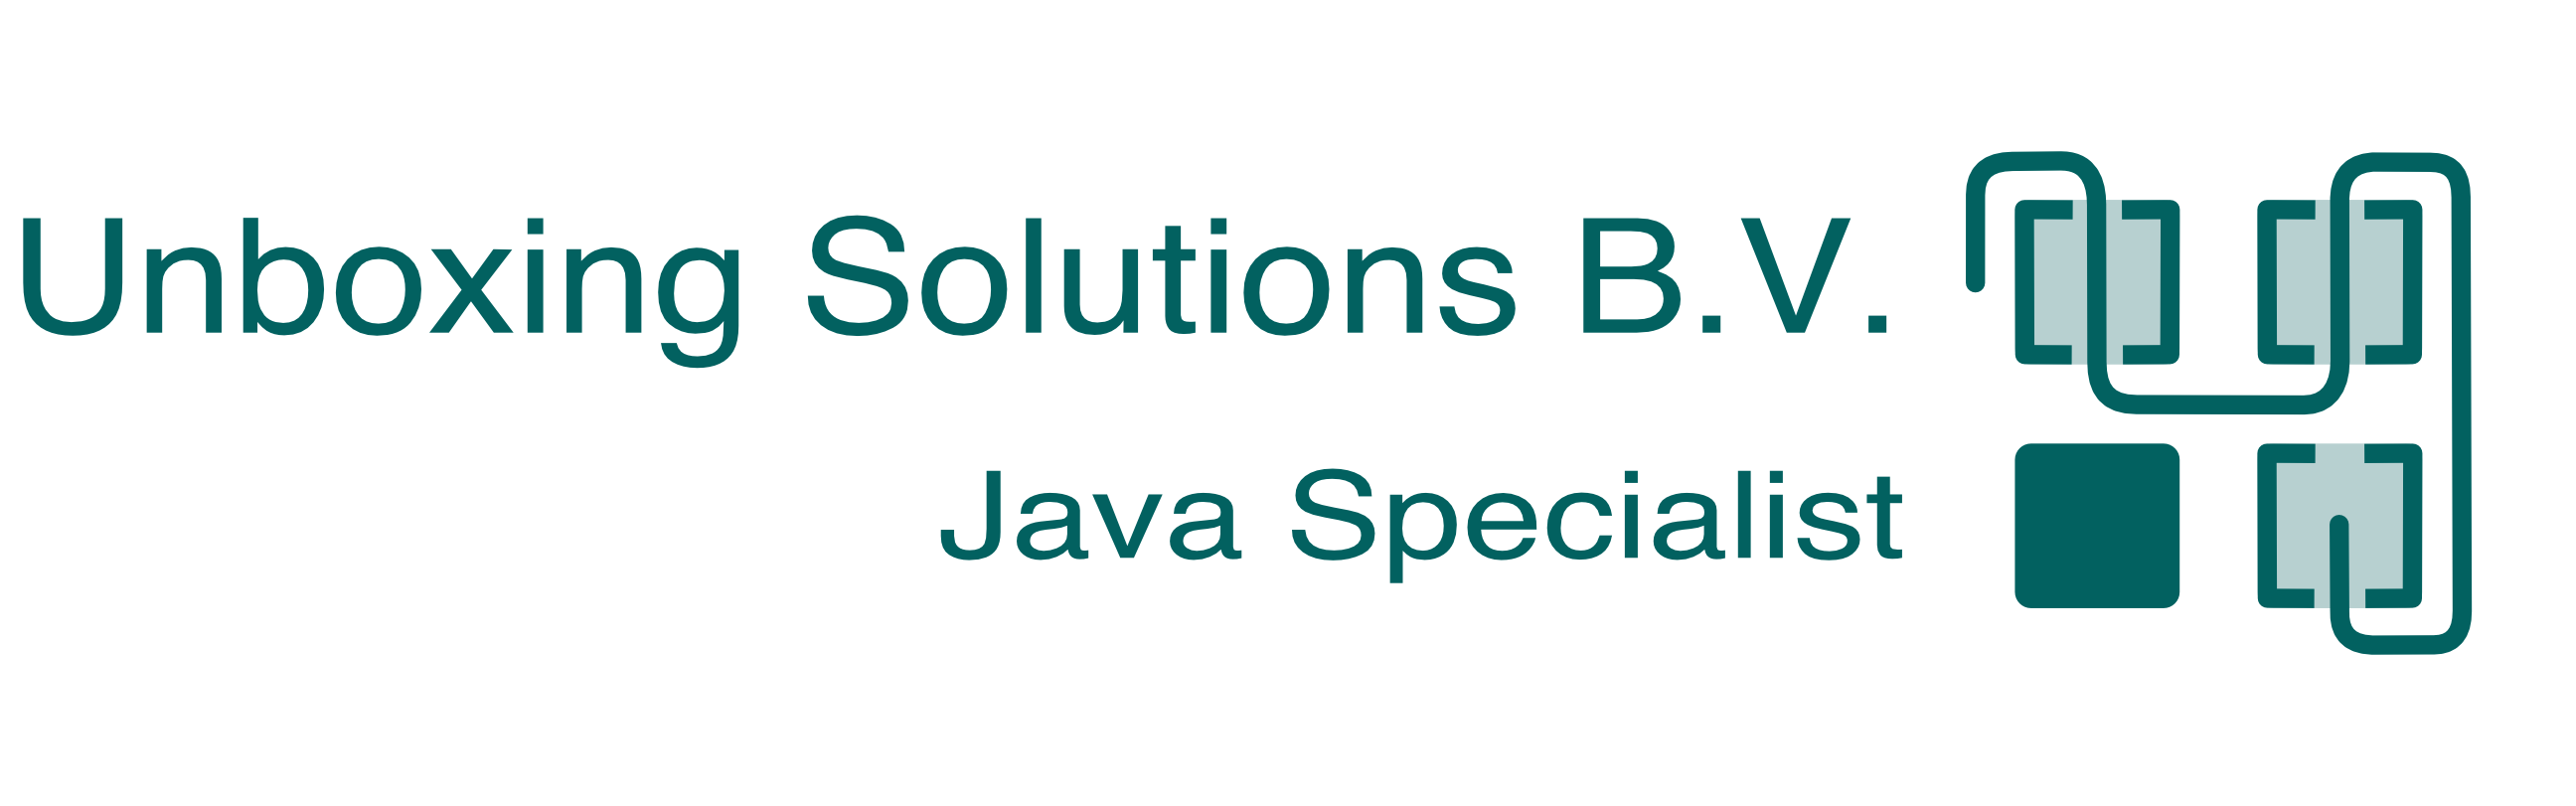 Unboxing Solutions - Java Specialist